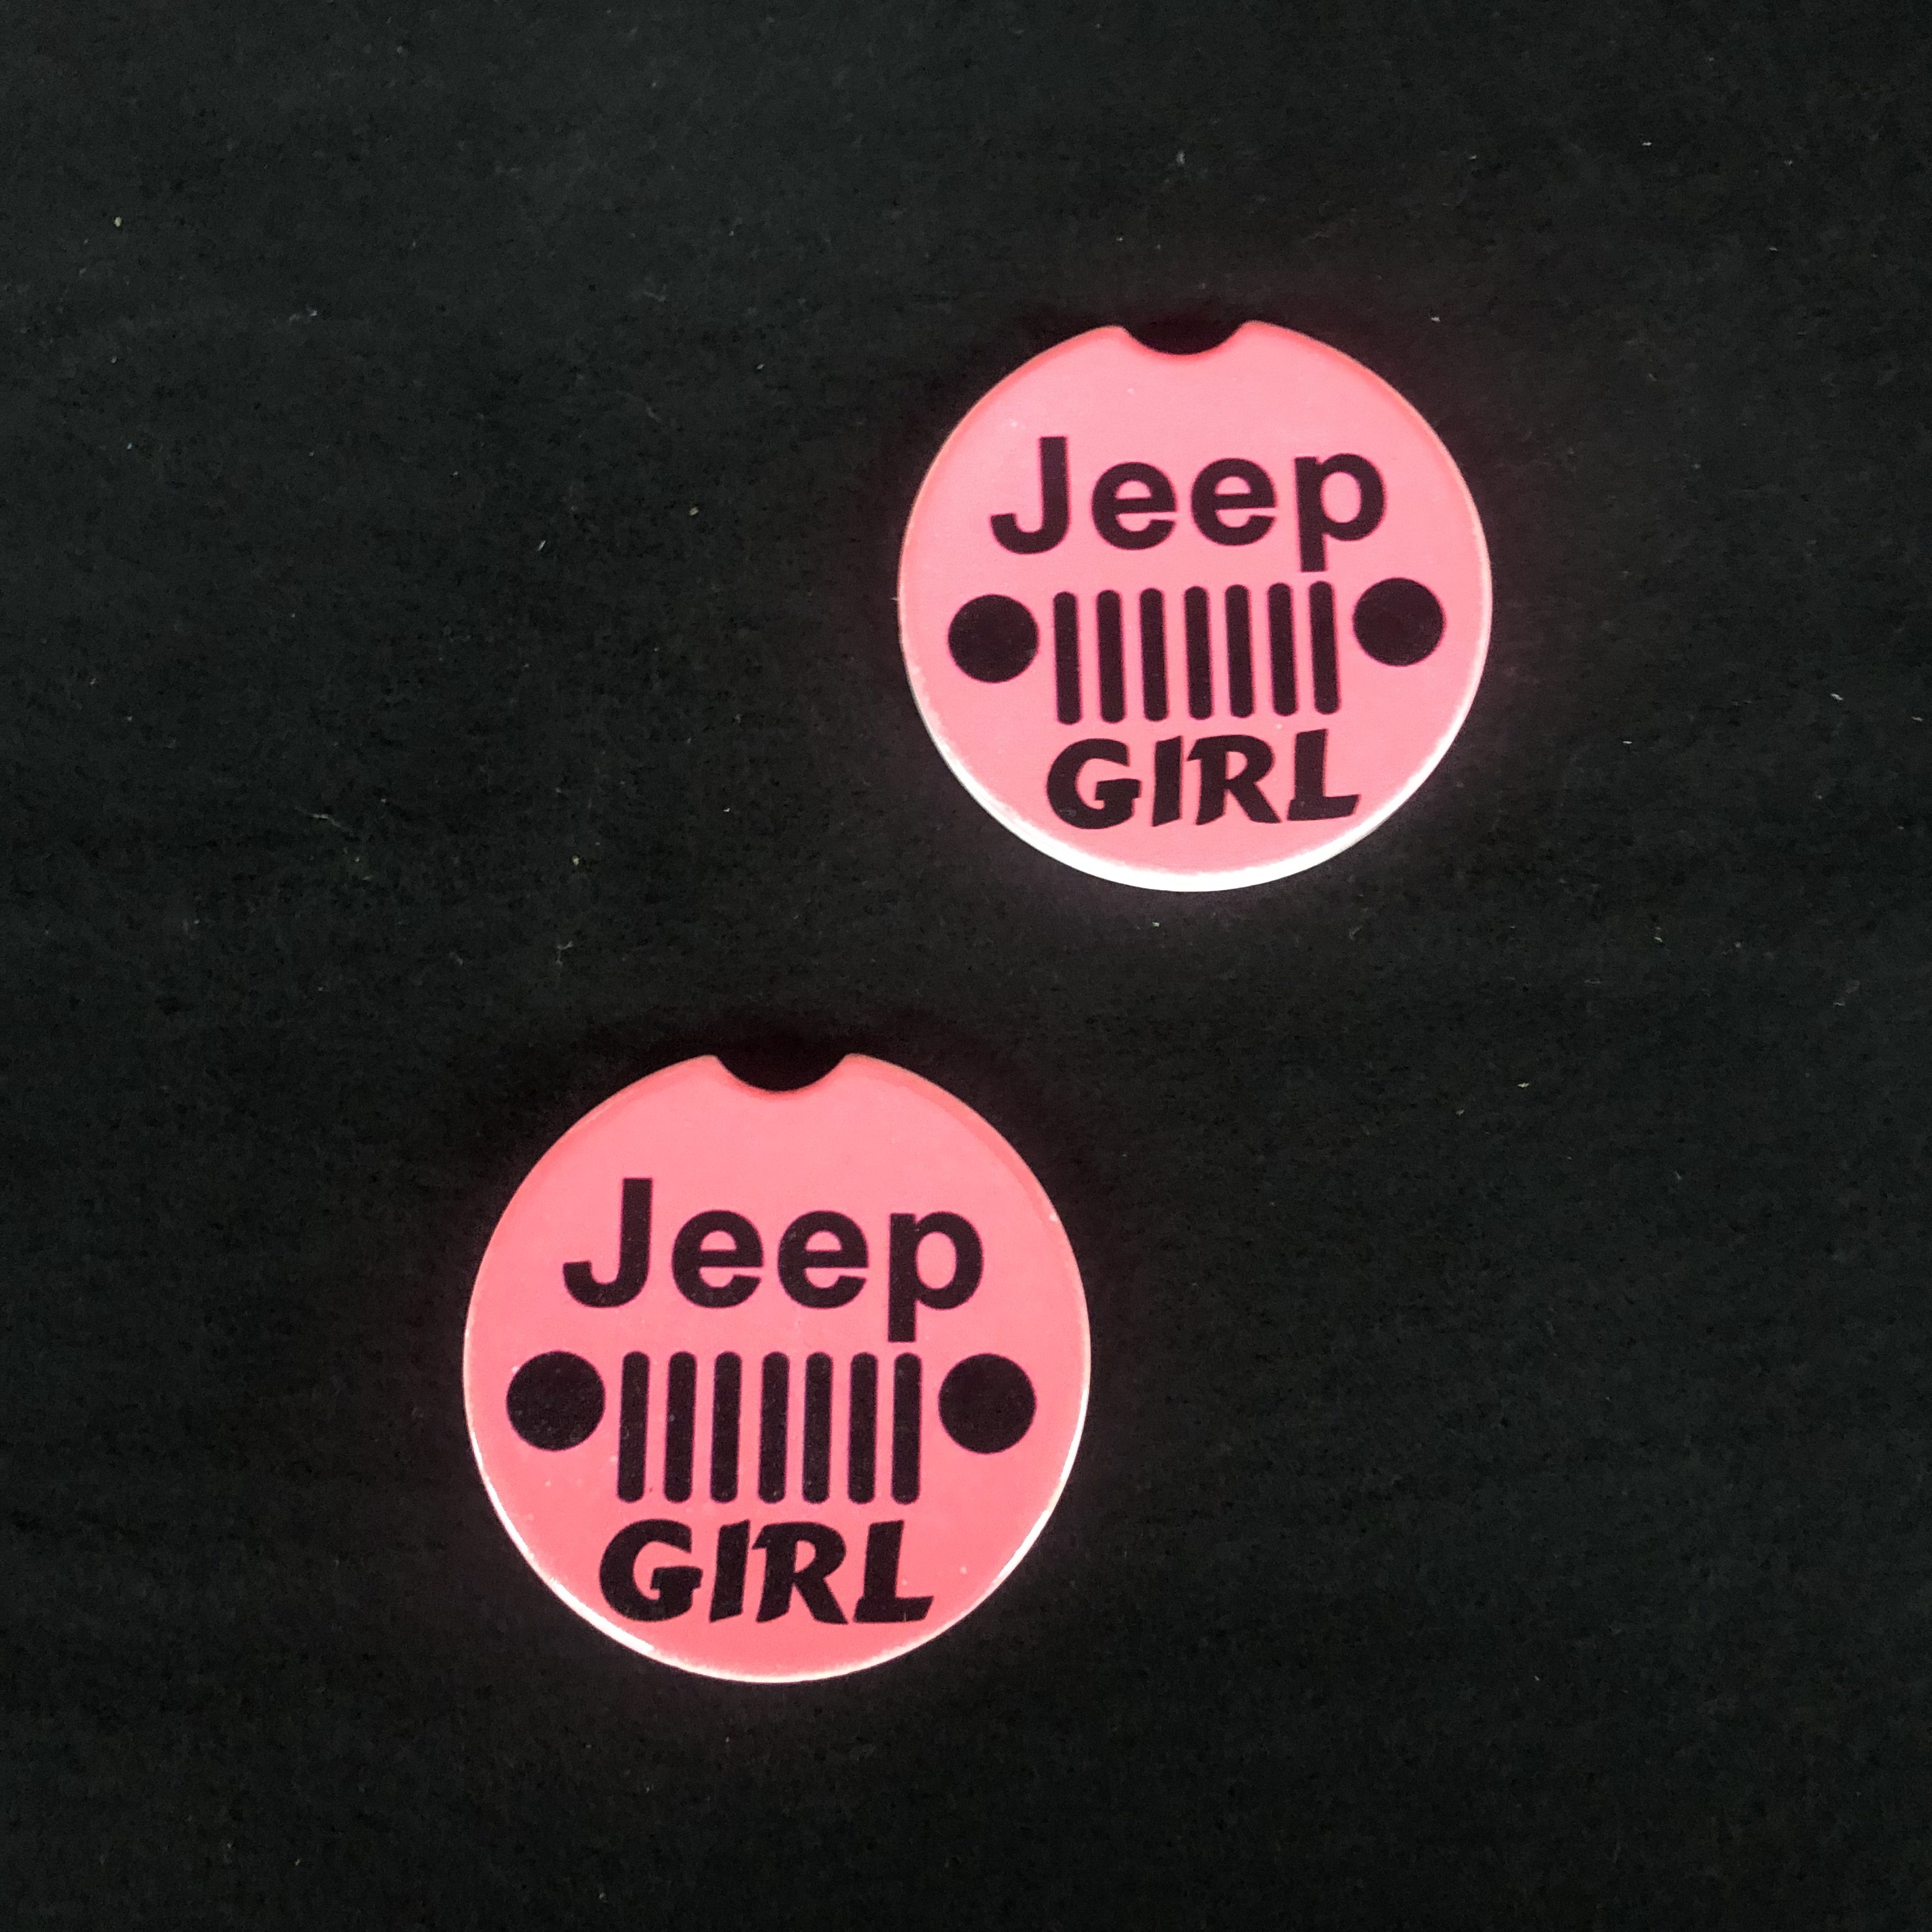 Pink Jeep Girl Sandstone car coaster set of two